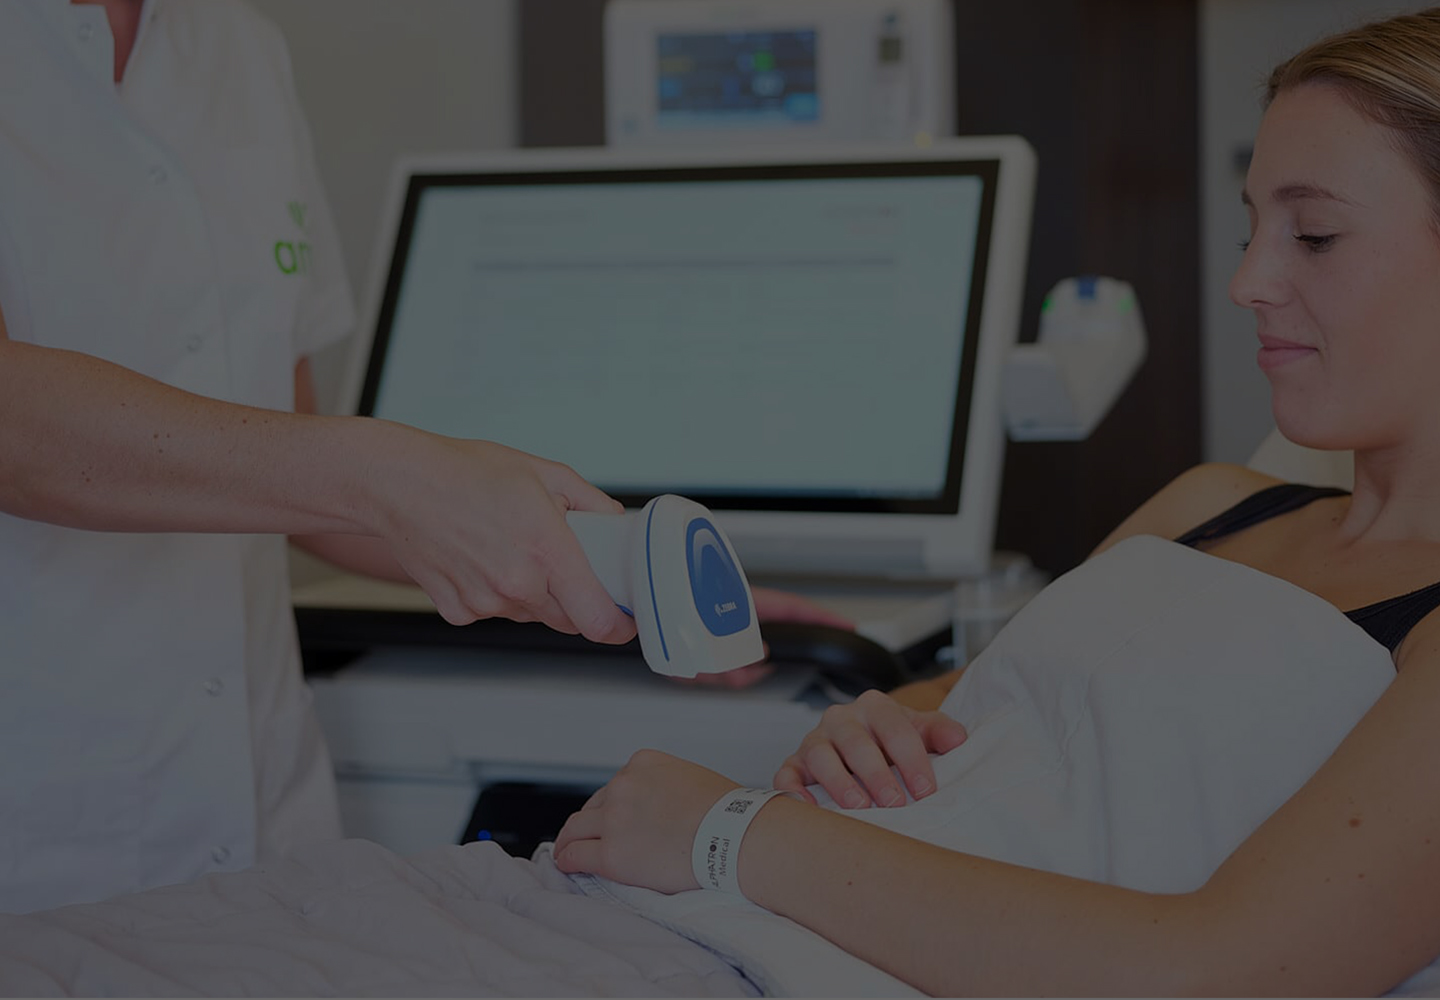 nurse_scan_wristband_patient_identify_automated_medication_dispensing_system_scanning